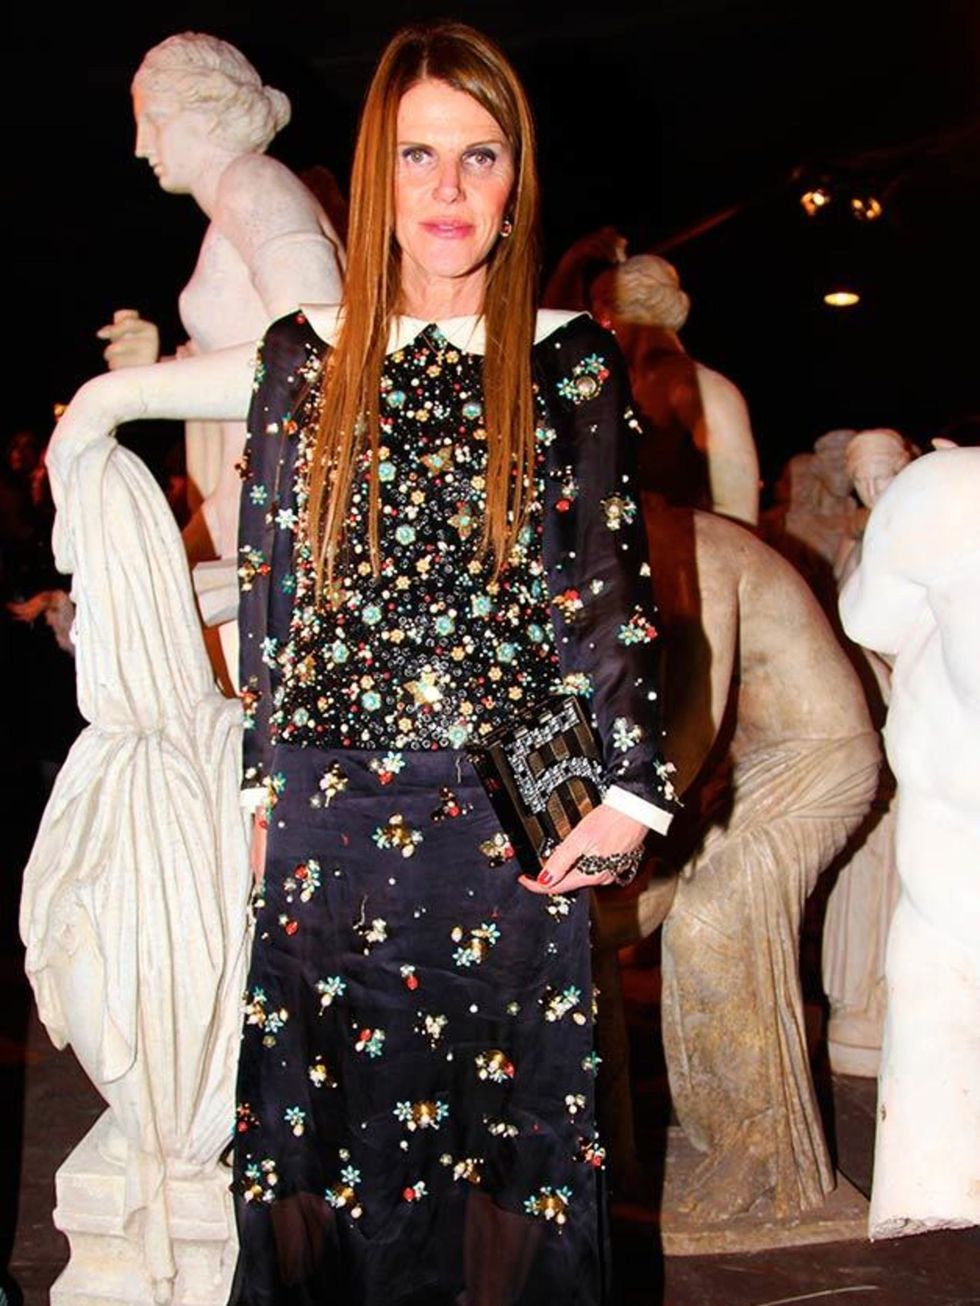 Anna Dello Russo attends the Chanel Metiers d'Art show, Italy, December 2015.